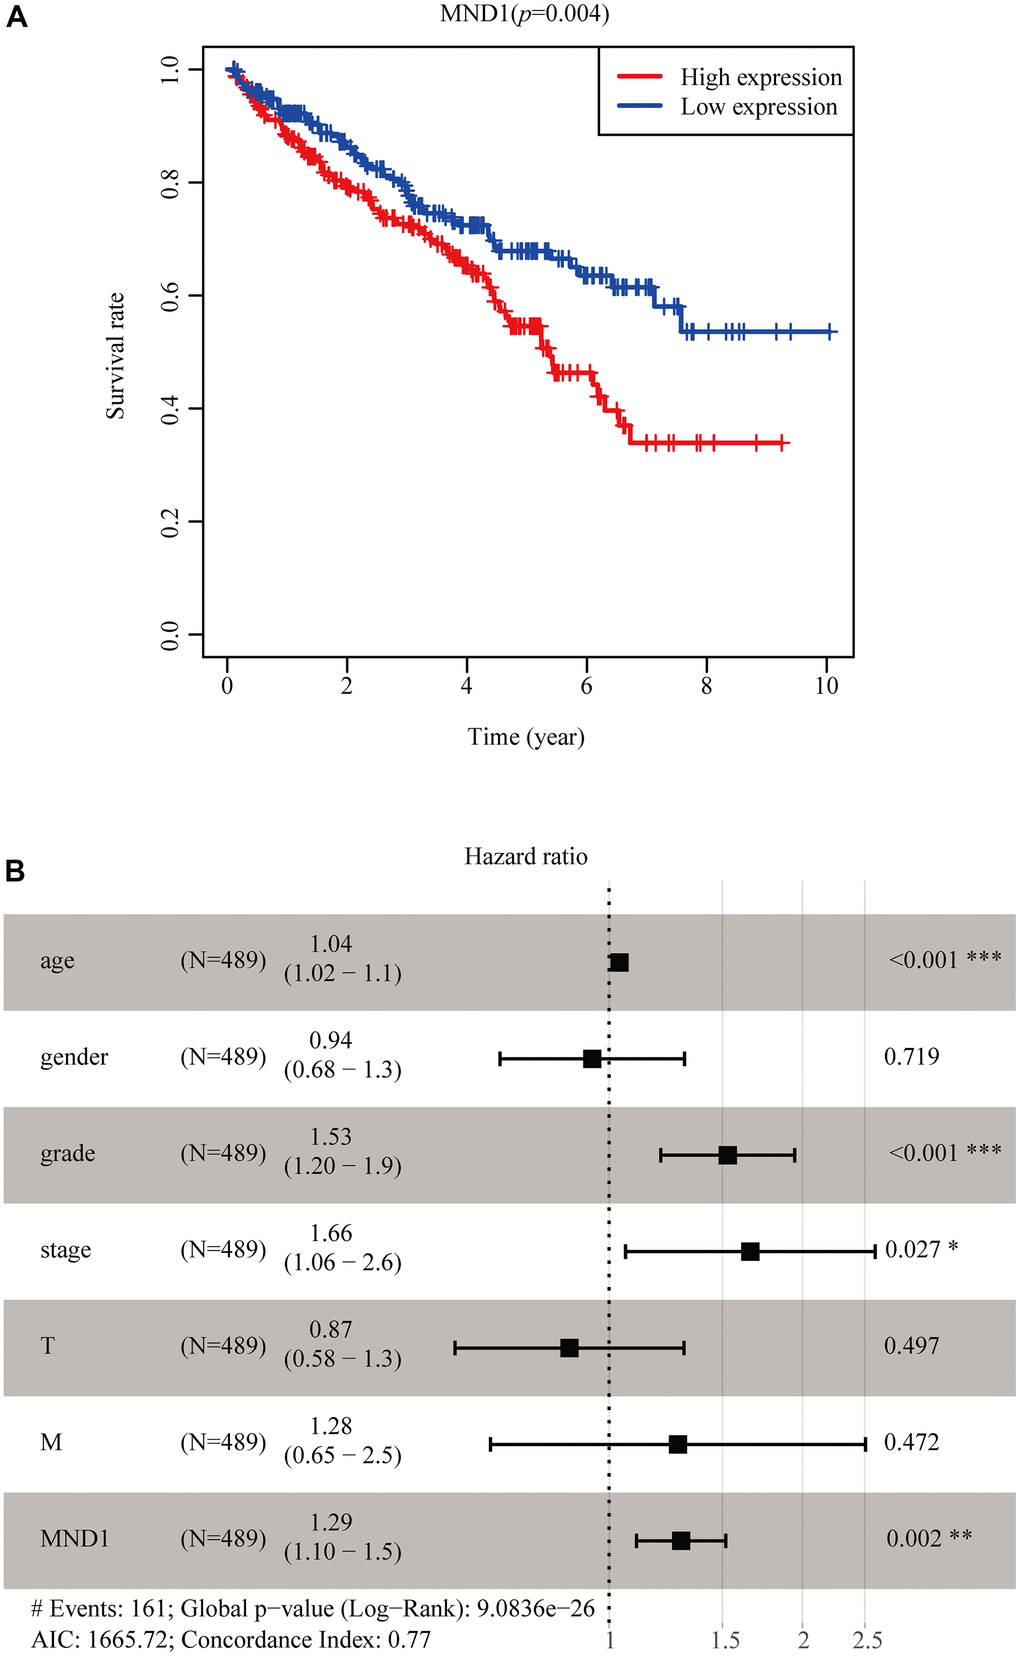 MND1 expression in tumor tissues is associated with poor survival in KIRC patients. (A) Associations with overall survival and the expression of MND1 in TCGA patients. (B) Multivariate Cox analysis of MND1.